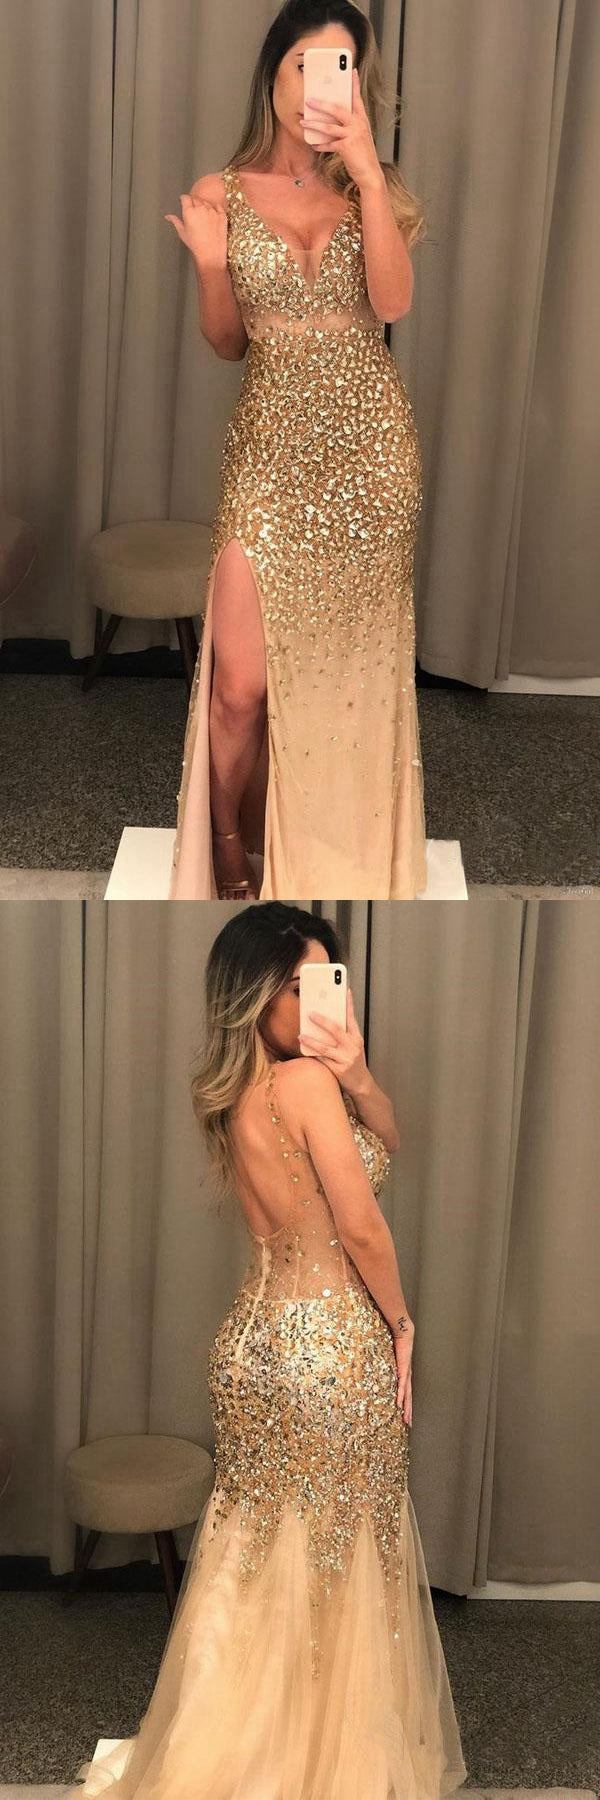 Sexy Shinning Prom Dress with Slit, Pageant Dress, Evening Dress, Dance Dresses, Graduation School Party Gown